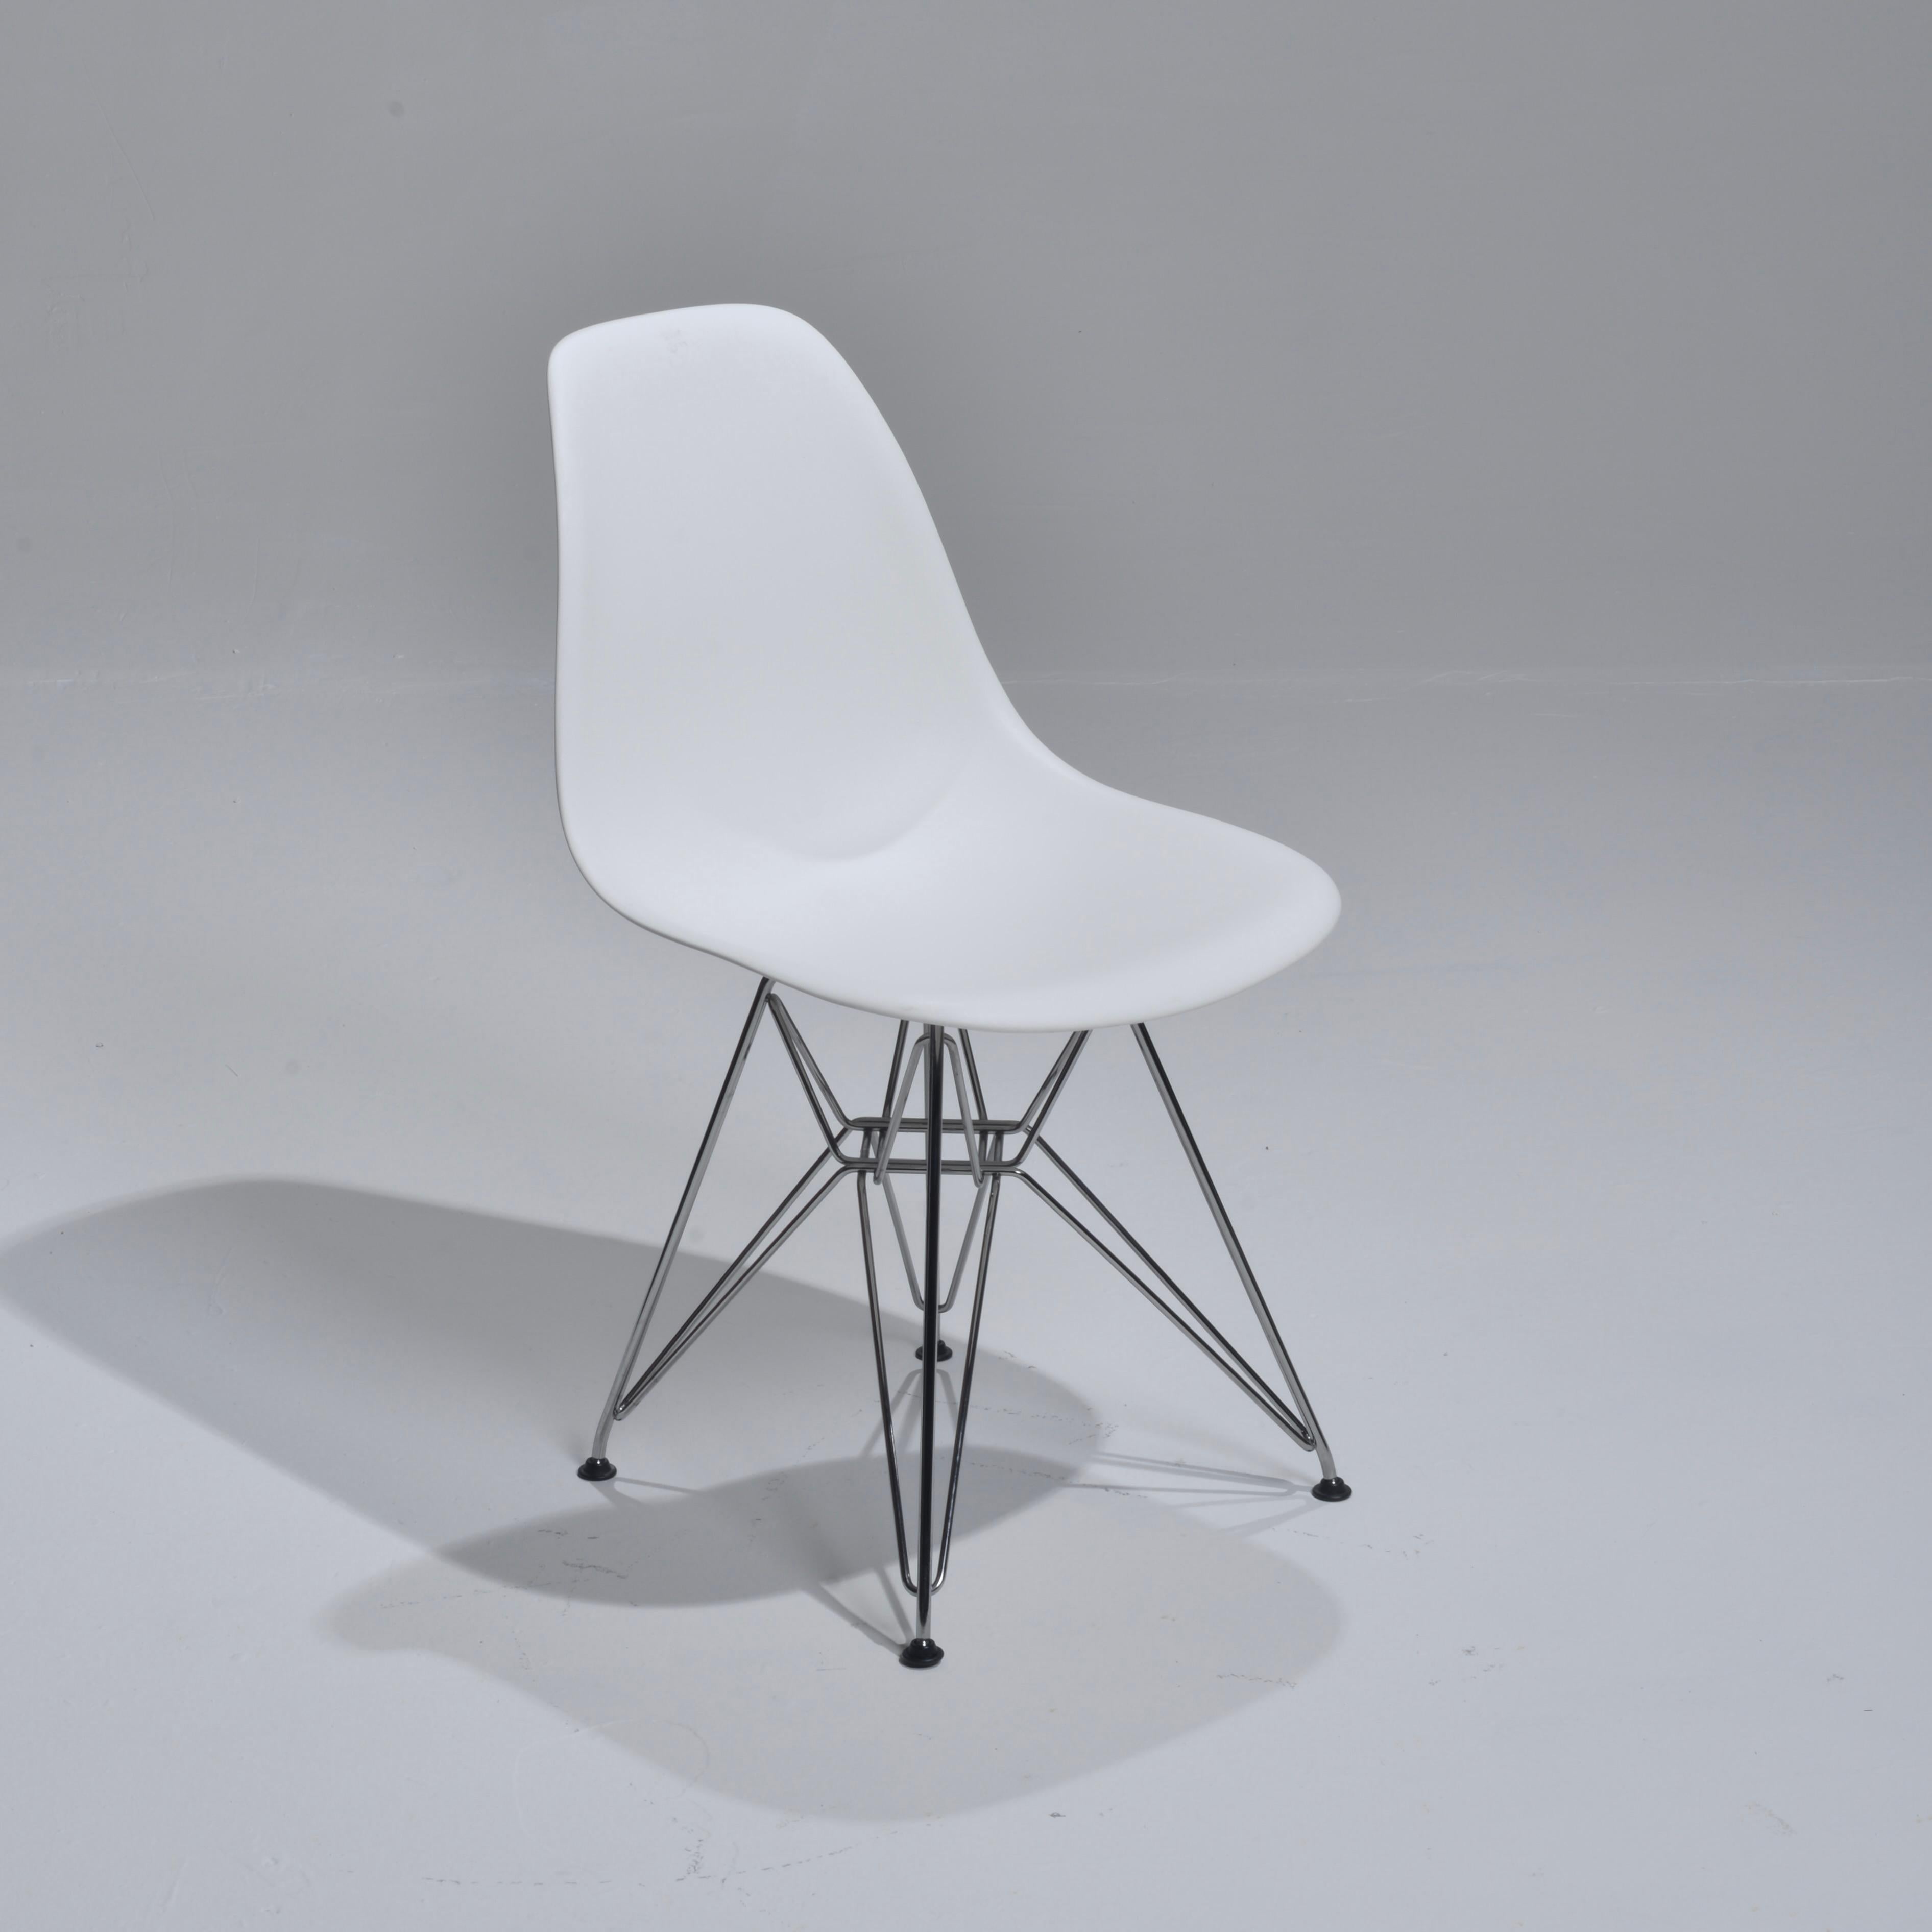 We have 65 of the these original Herman Miller polypropylene molded chairs designed by Ray and Charle Eames. We have 65 white chairs.
 